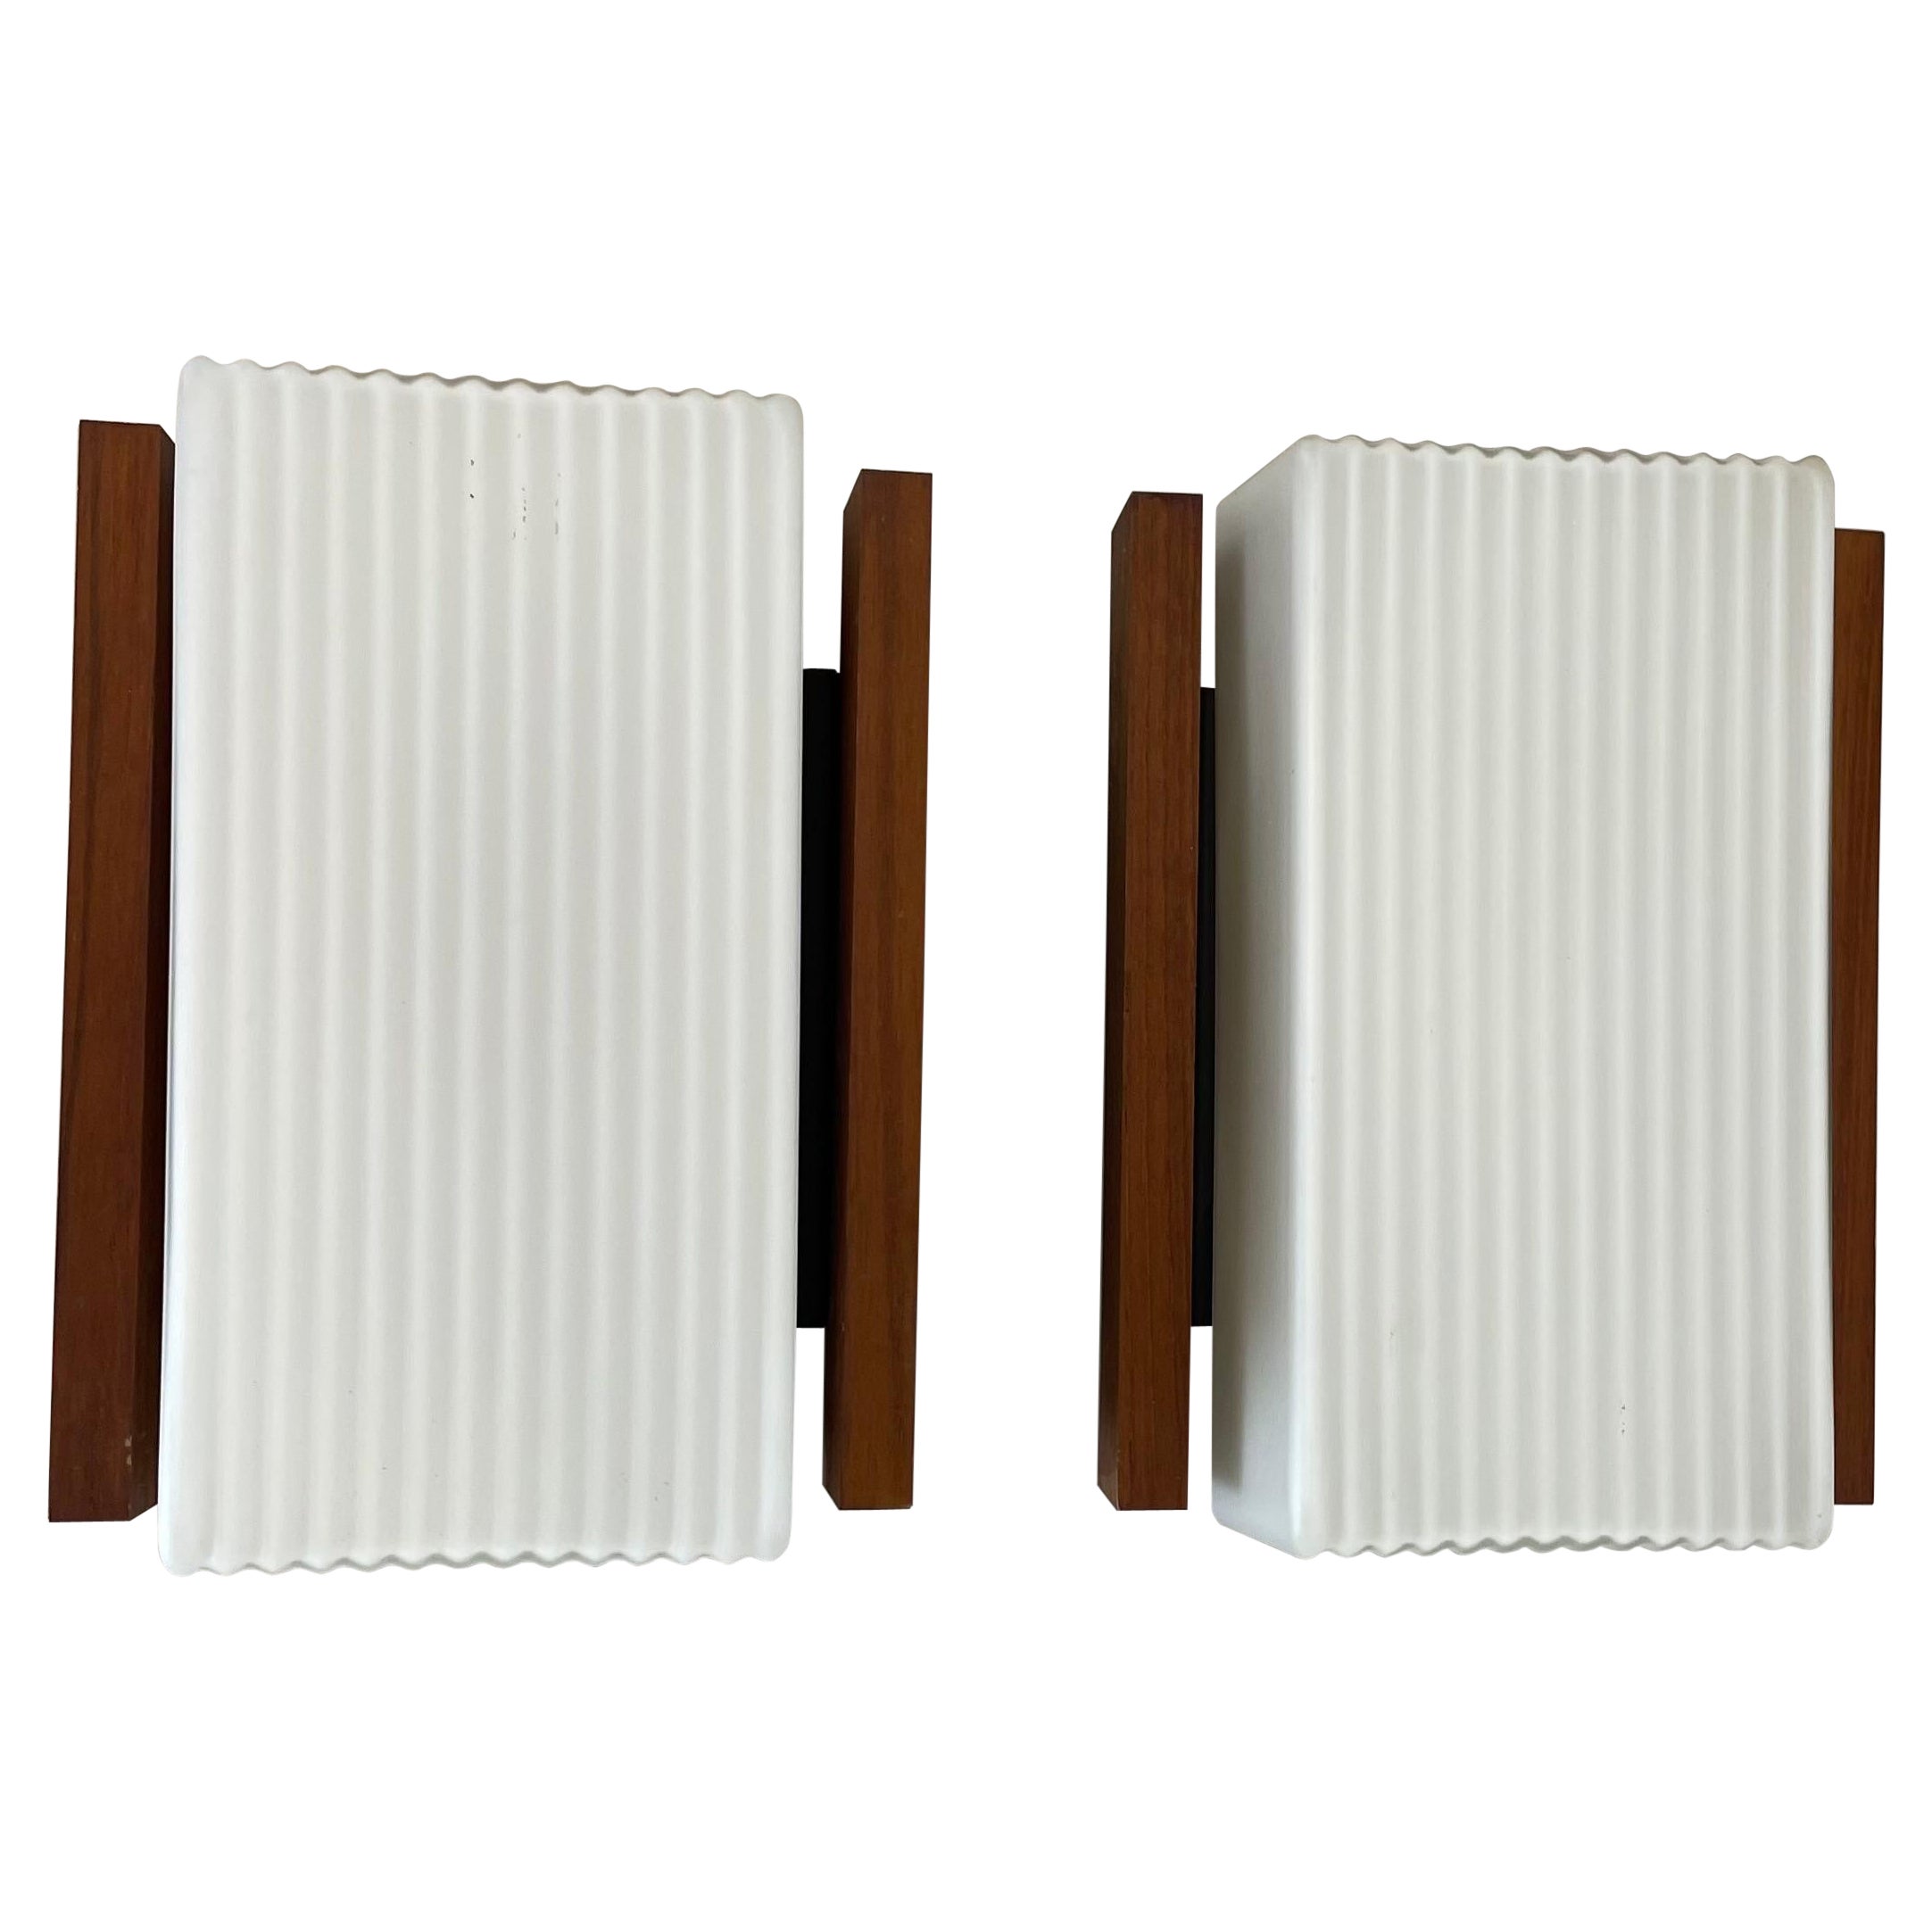 Set of 2 satin white glass and teak Wall Lights by BEGA Lights, Germany 1960s For Sale